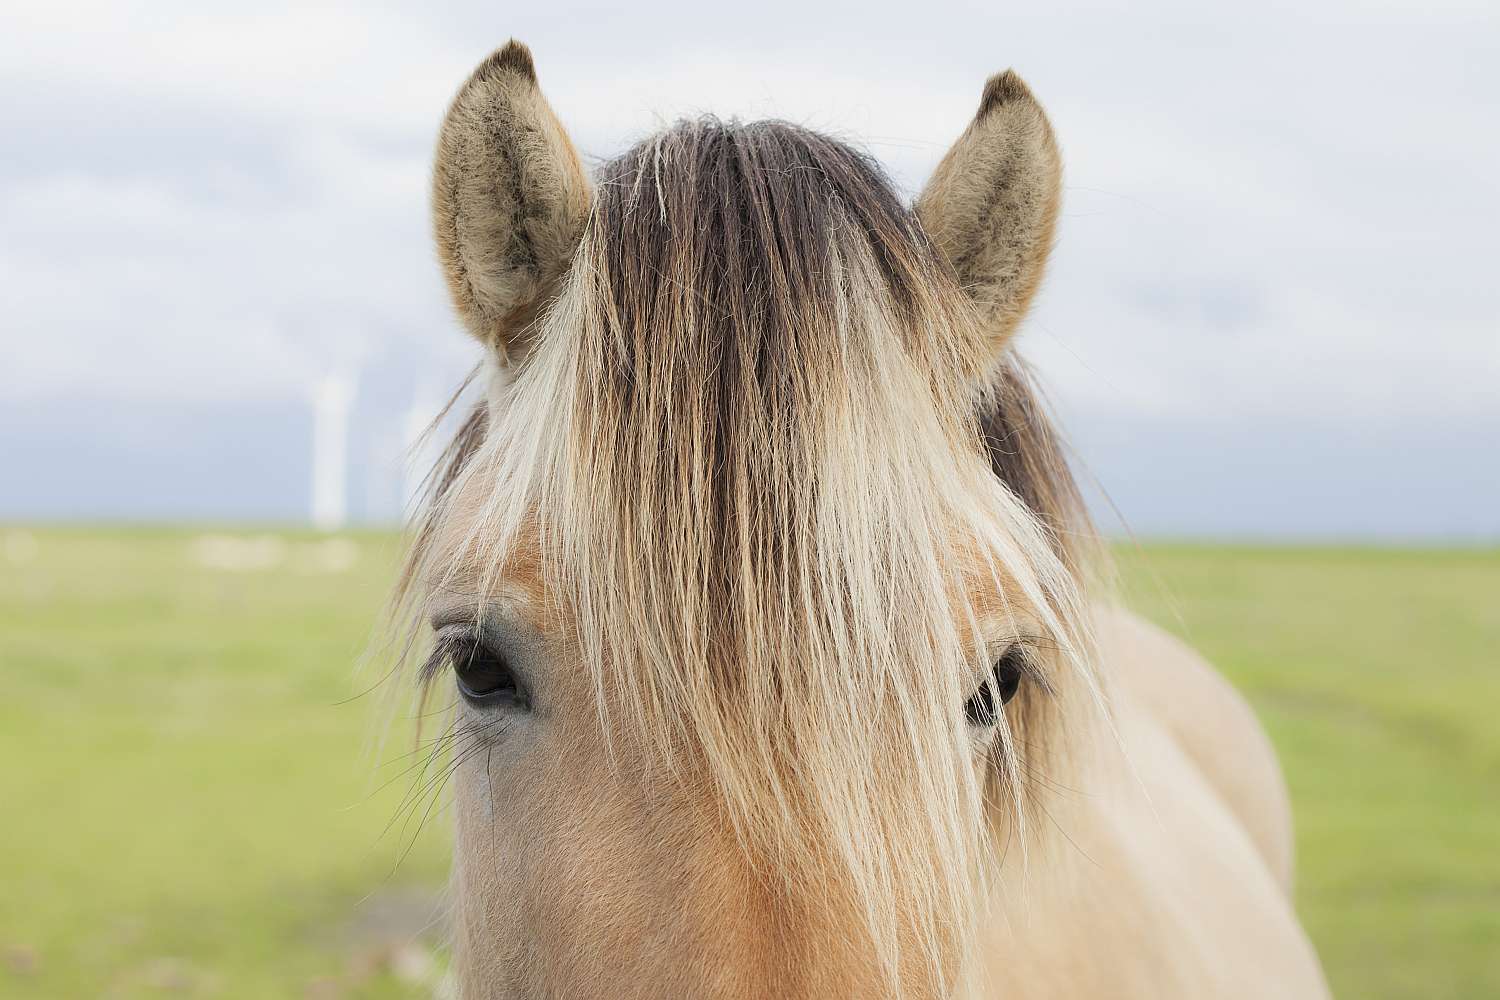 A close up of a horse's forelock.